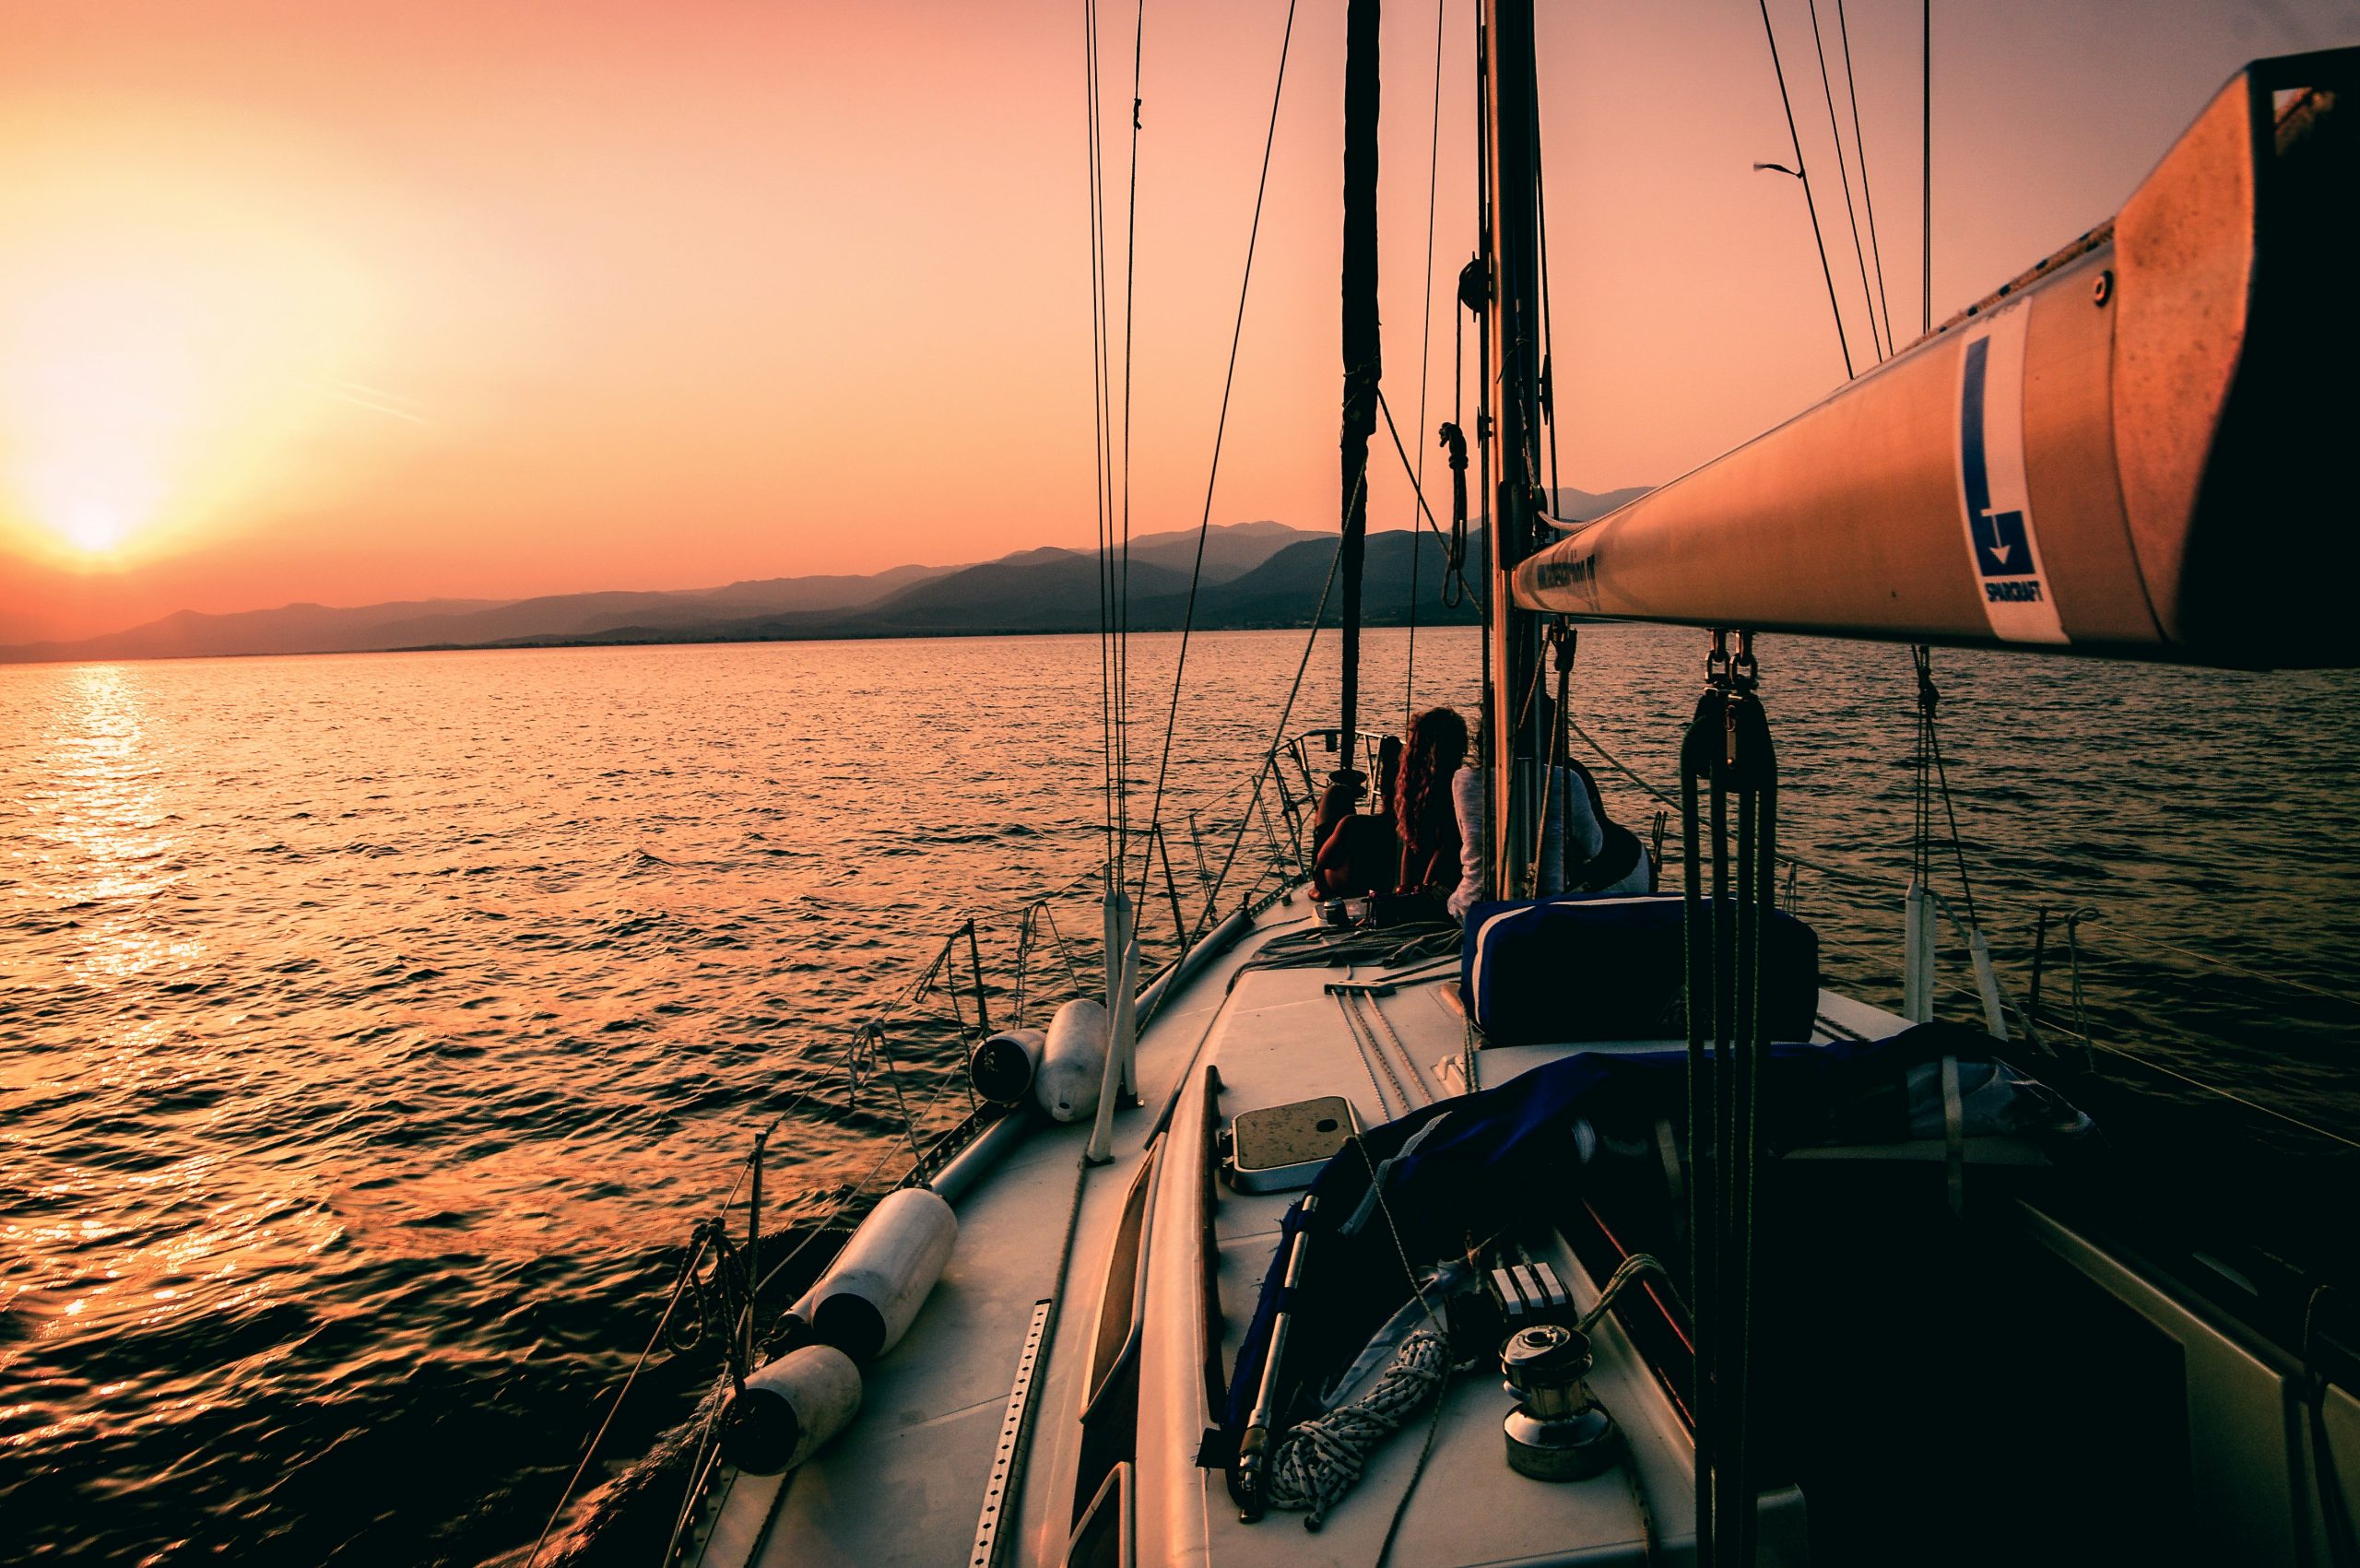 explore the joys of sailing with our comprehensive range of sailing equipment and expertise. unleash your sense of adventure on the open seas and experience the freedom of sailing with us.